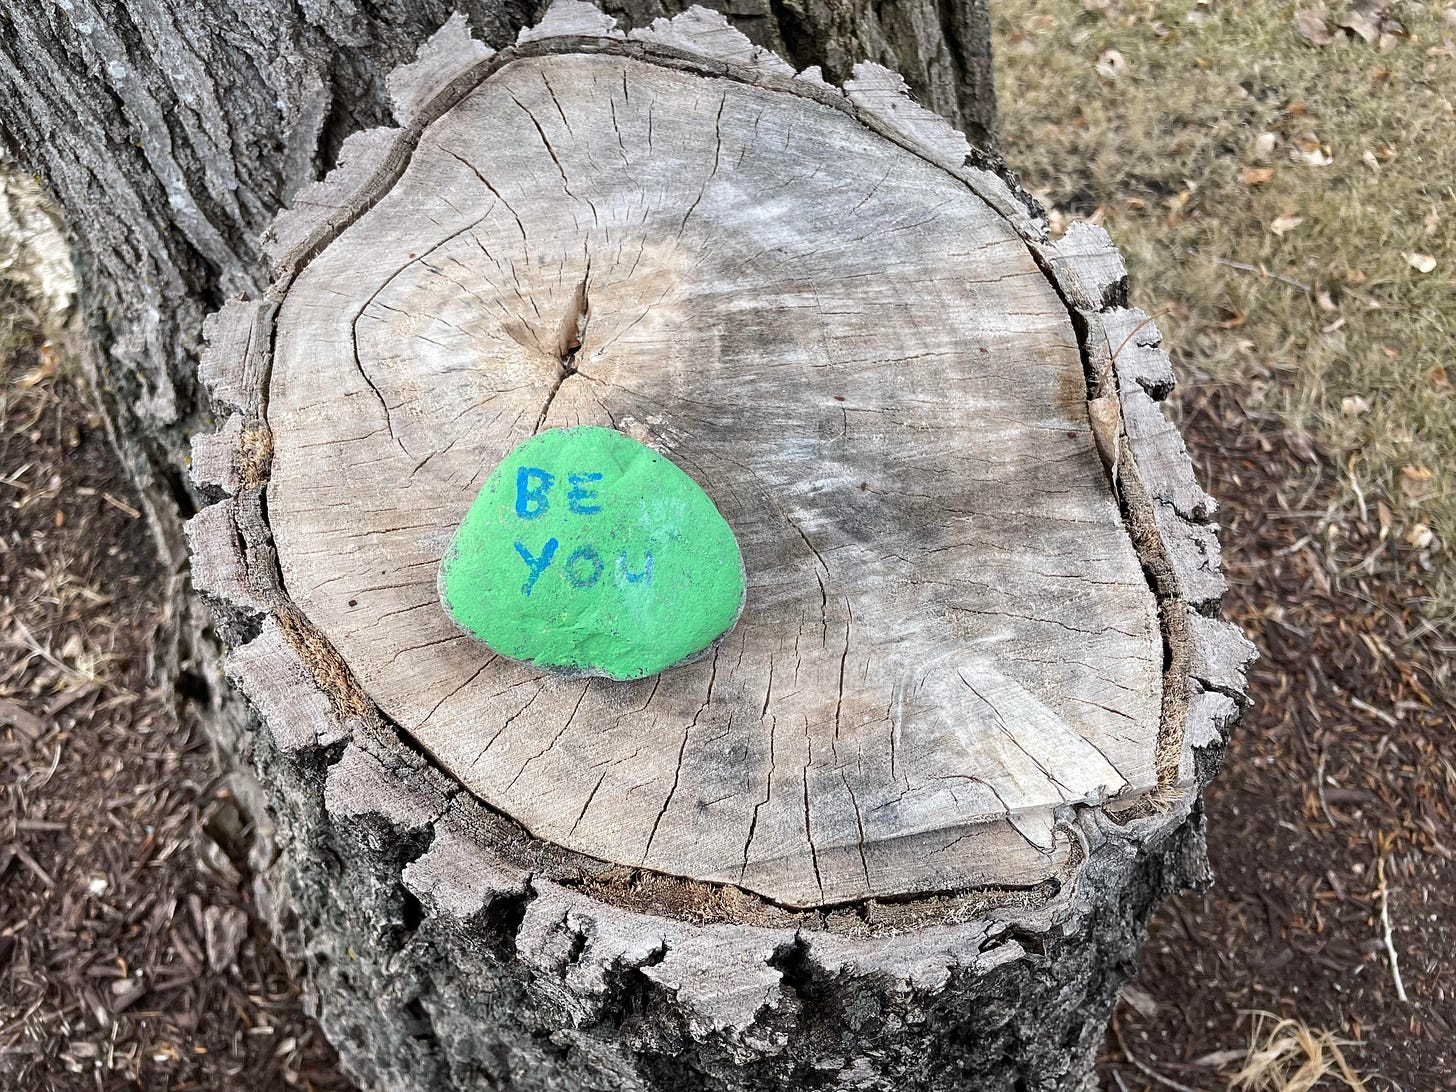 A green rock with the words "BE YOU" painted on it sits on a tree stump.